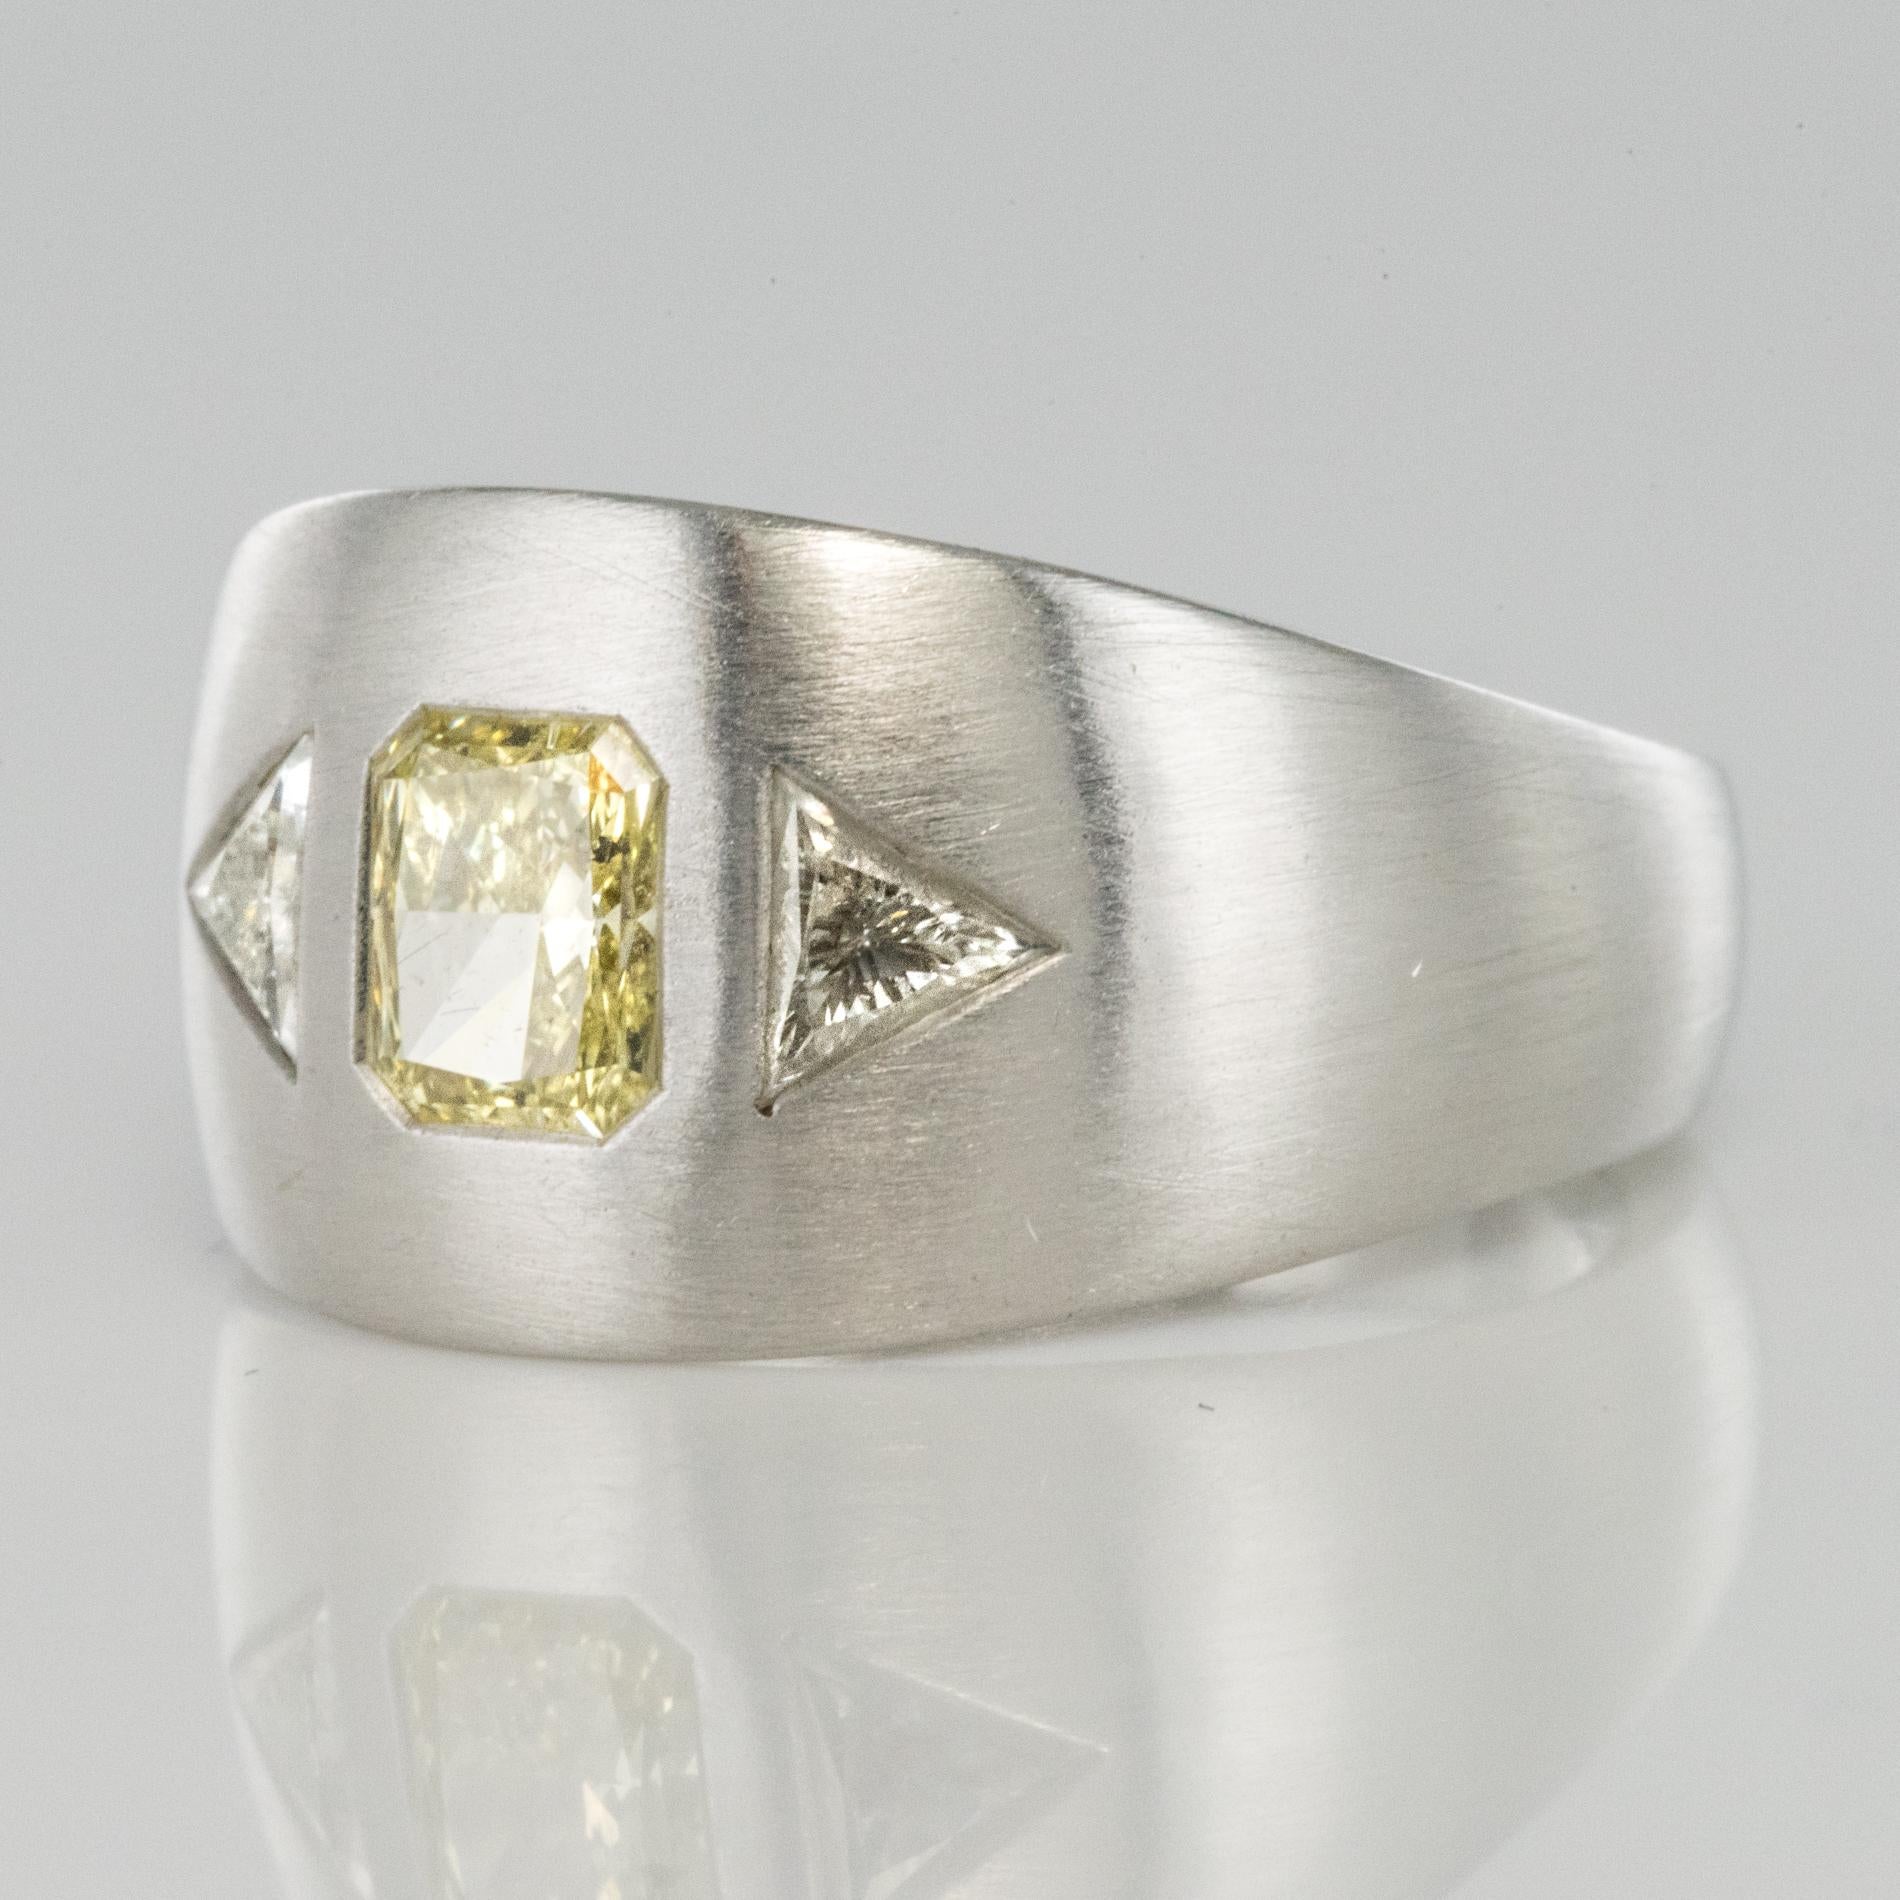 Modernist Baume Modern Yellow and White Diamond Polished Gold Ring For Sale